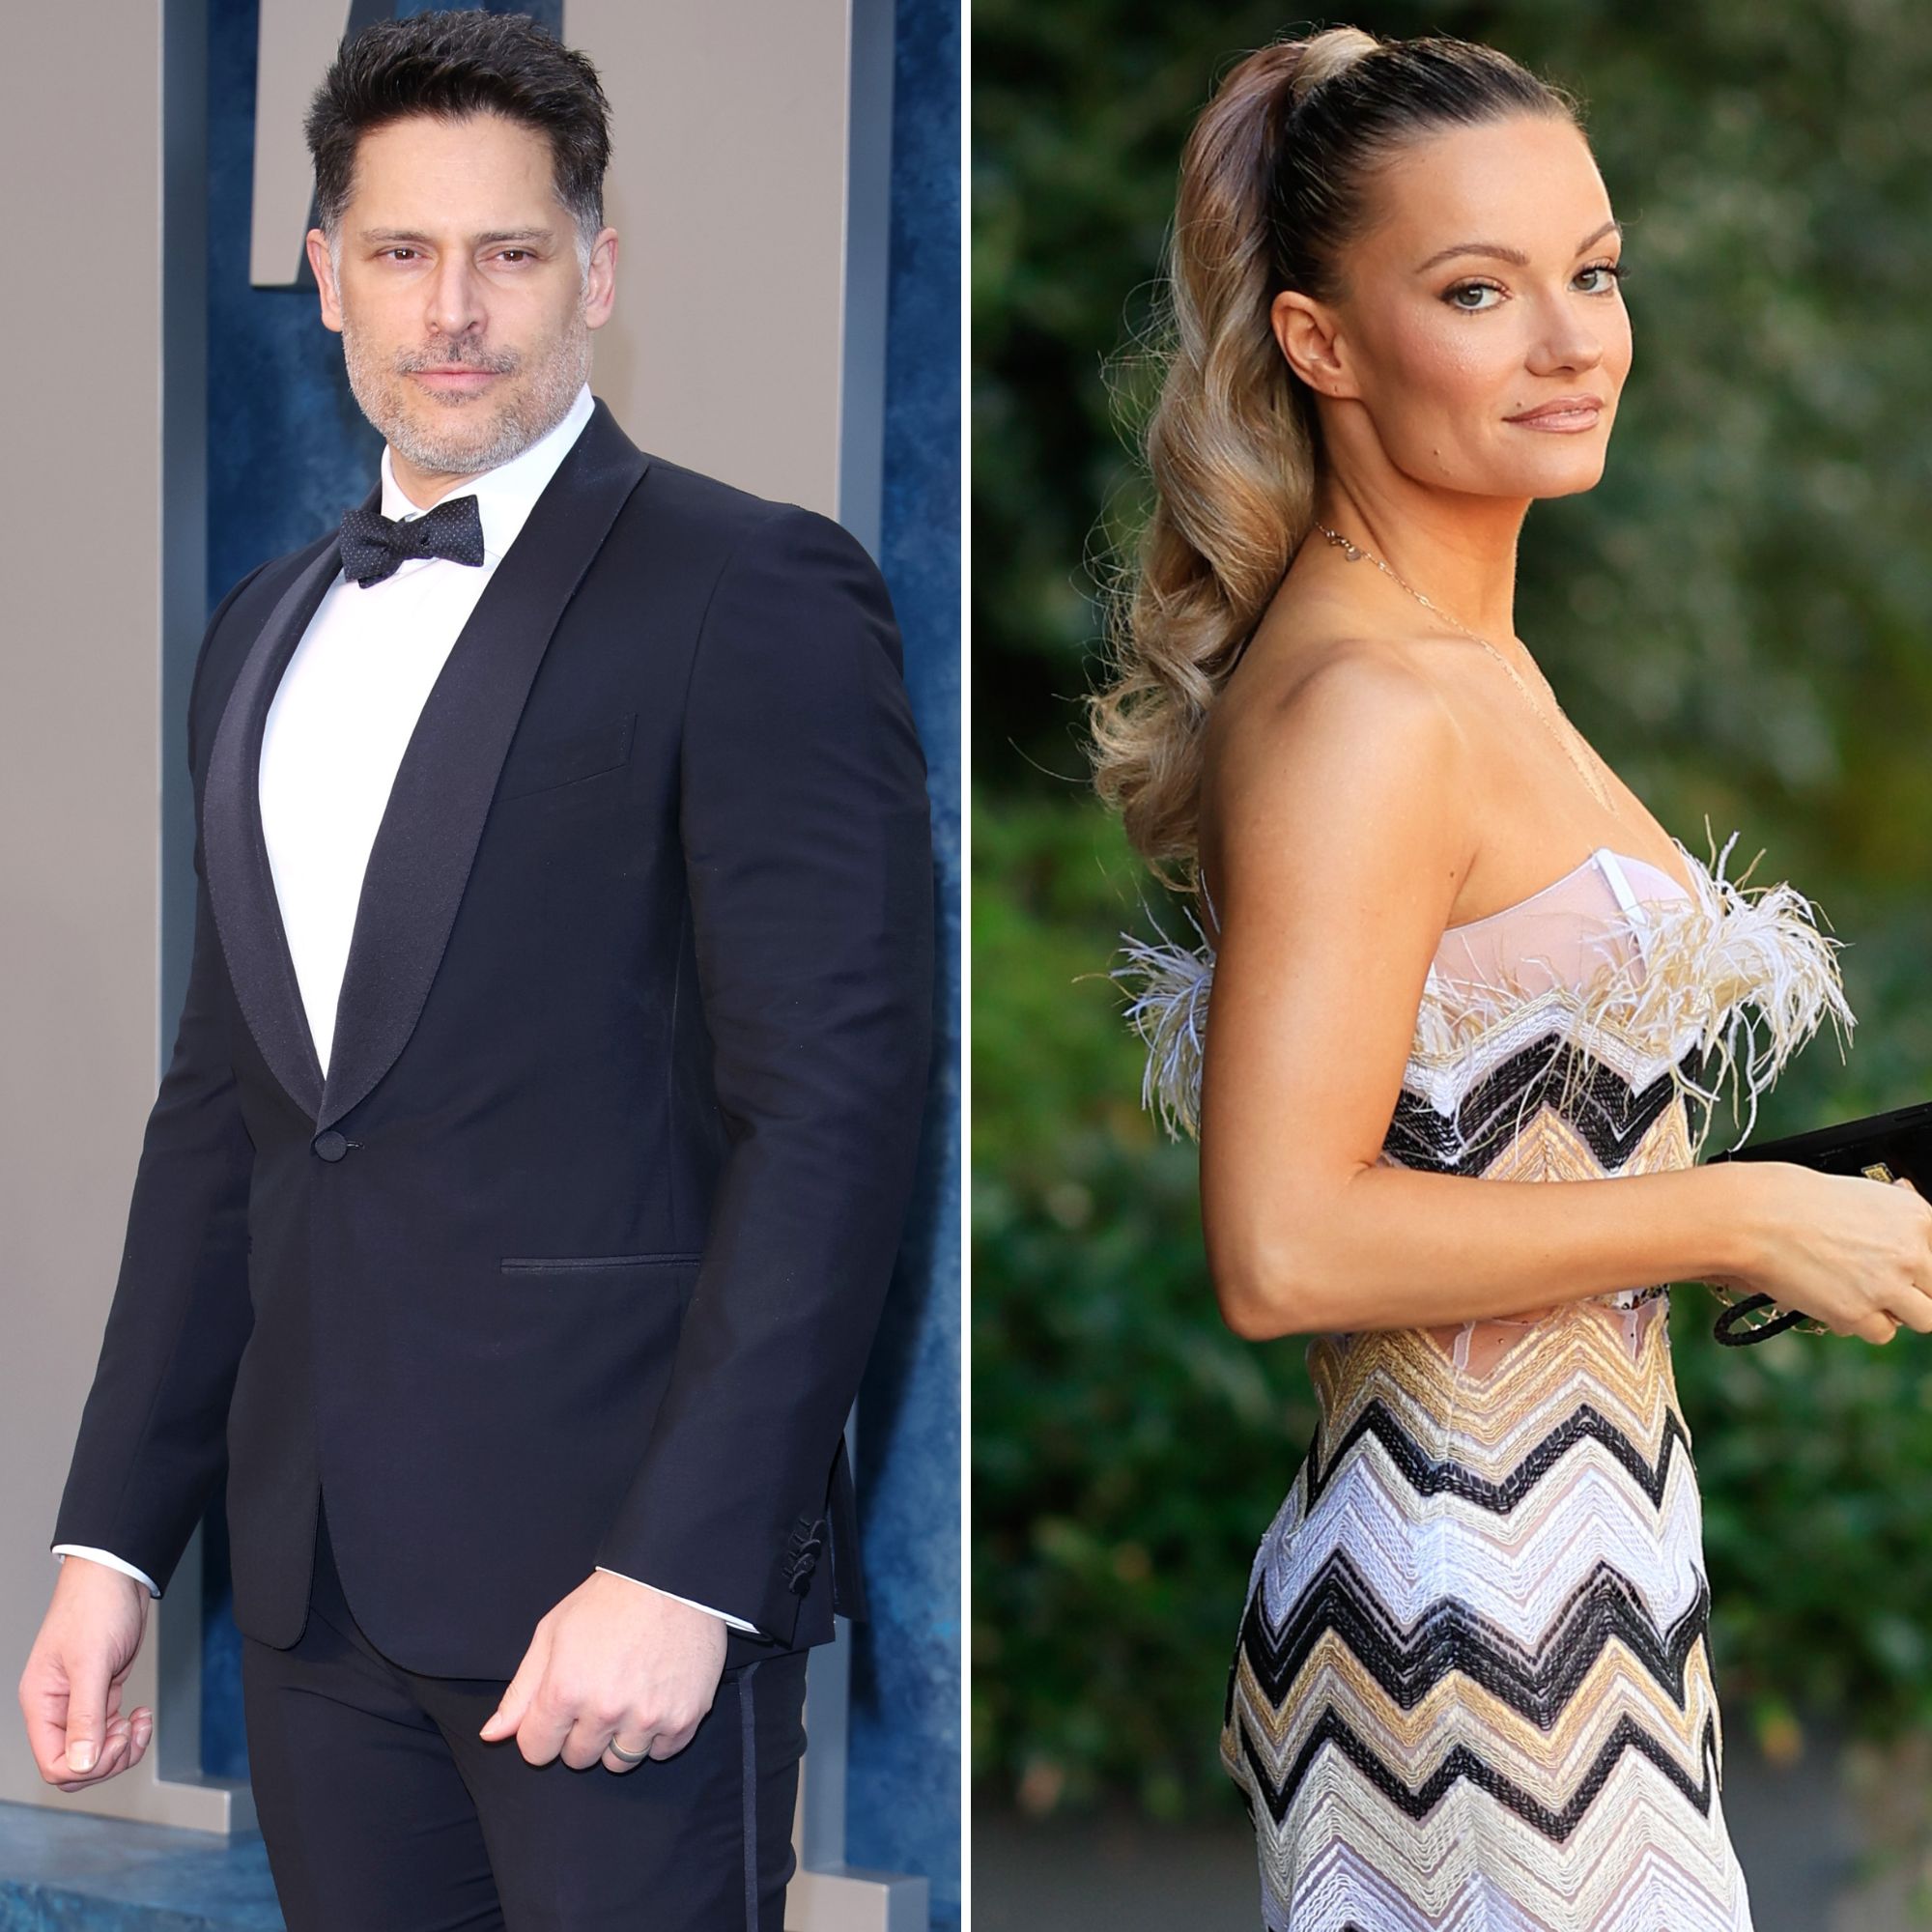 Joe Manganiello Goes Instagram Official with Girlfriend Caitlin O